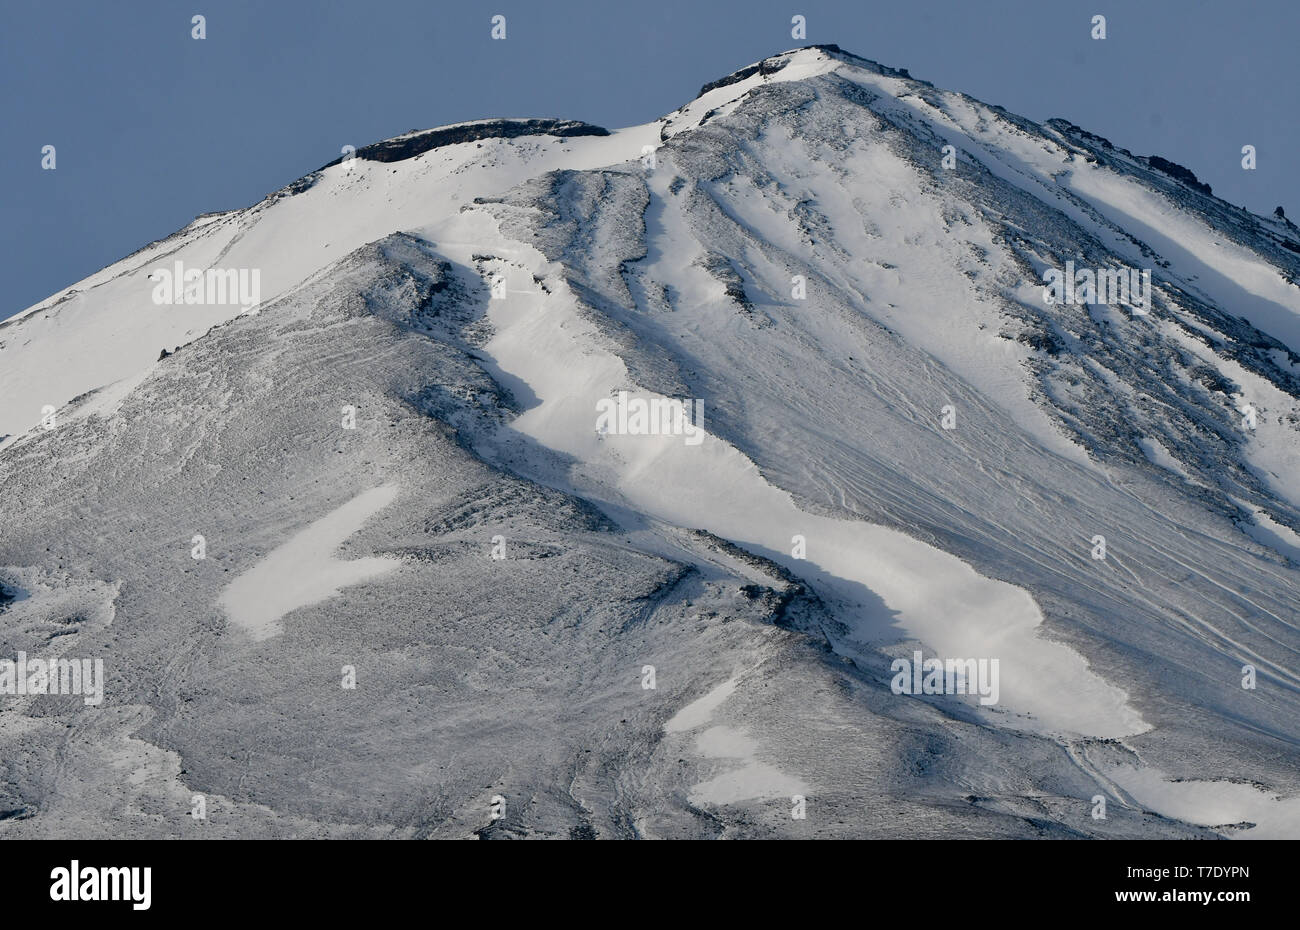 Tokyo, Japan. 5th May, 2019. A view of Mount Fuji highest point from Kawaguchiko in Shizuoka Prefecture Japan on Sunday, May 5, 2019. Photo by: Ramiro Agustin Vargas Tabares Credit: Ramiro Agustin Vargas Tabares/ZUMA Wire/Alamy Live News Stock Photo